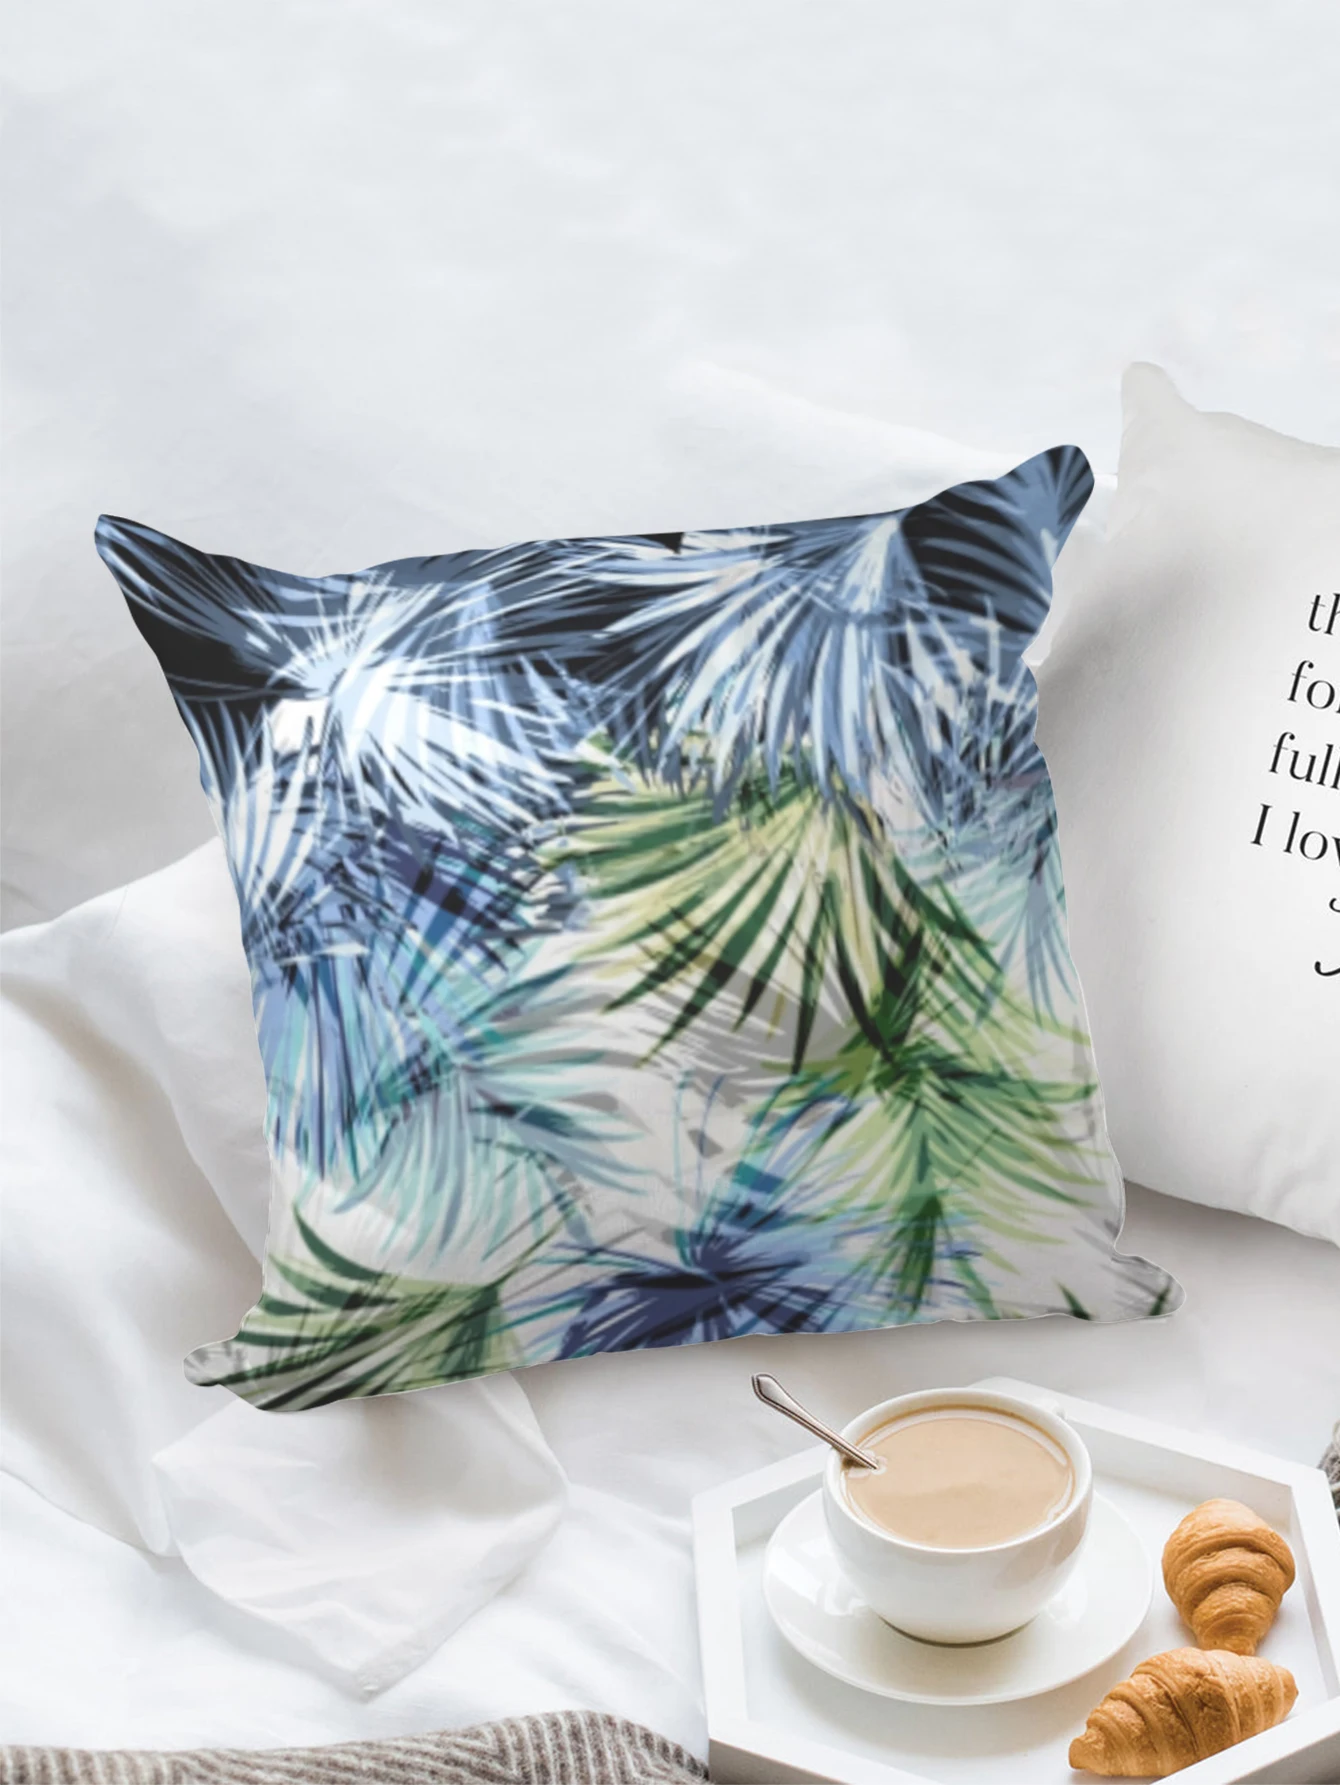 Decorative Leaf Pillowcase Polyester Square Cushion Cover Throw Pillows Bed Couch Home Decor Dakimakura 45x45cm